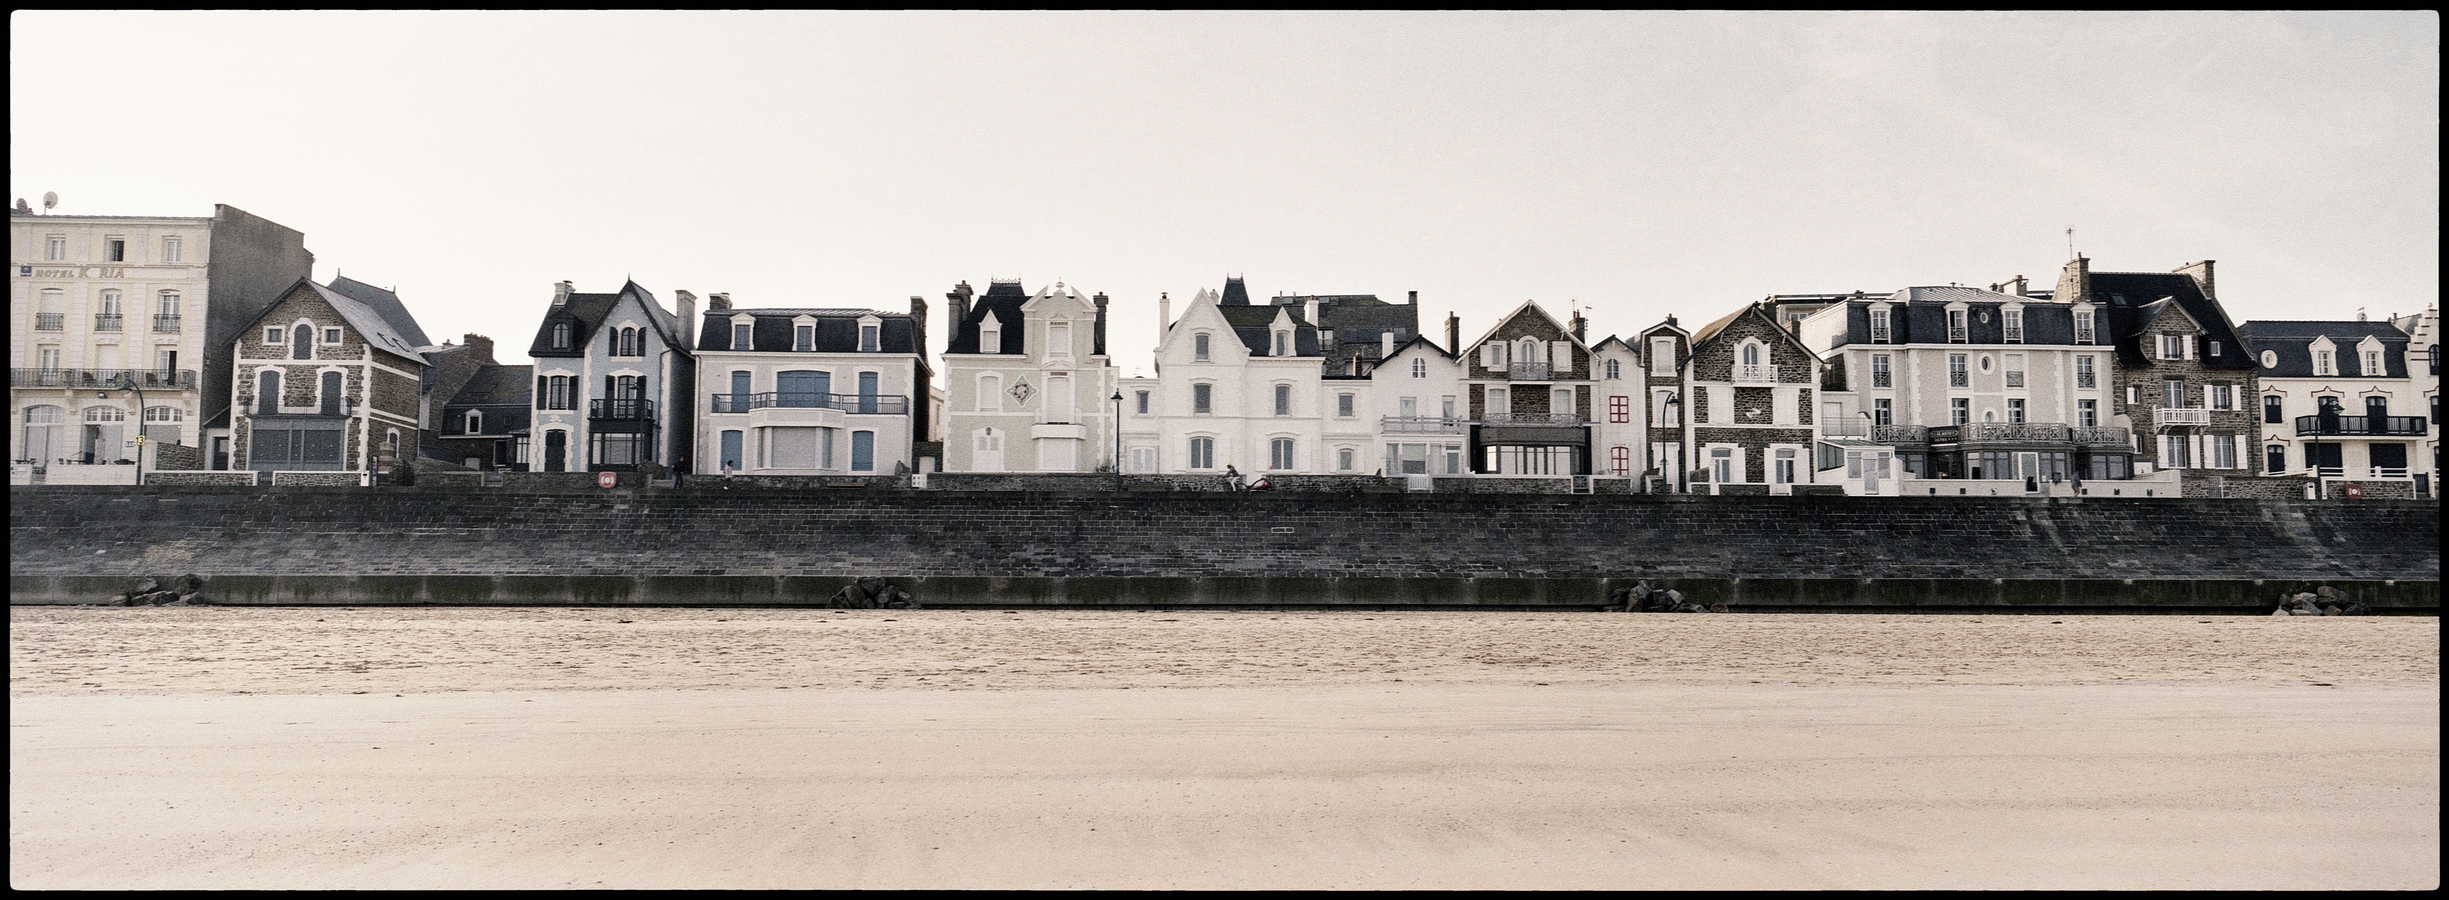 Saint-Malo, North Brittany, France 2022.All pictures are © Cyril Fakiri - No use without permission.